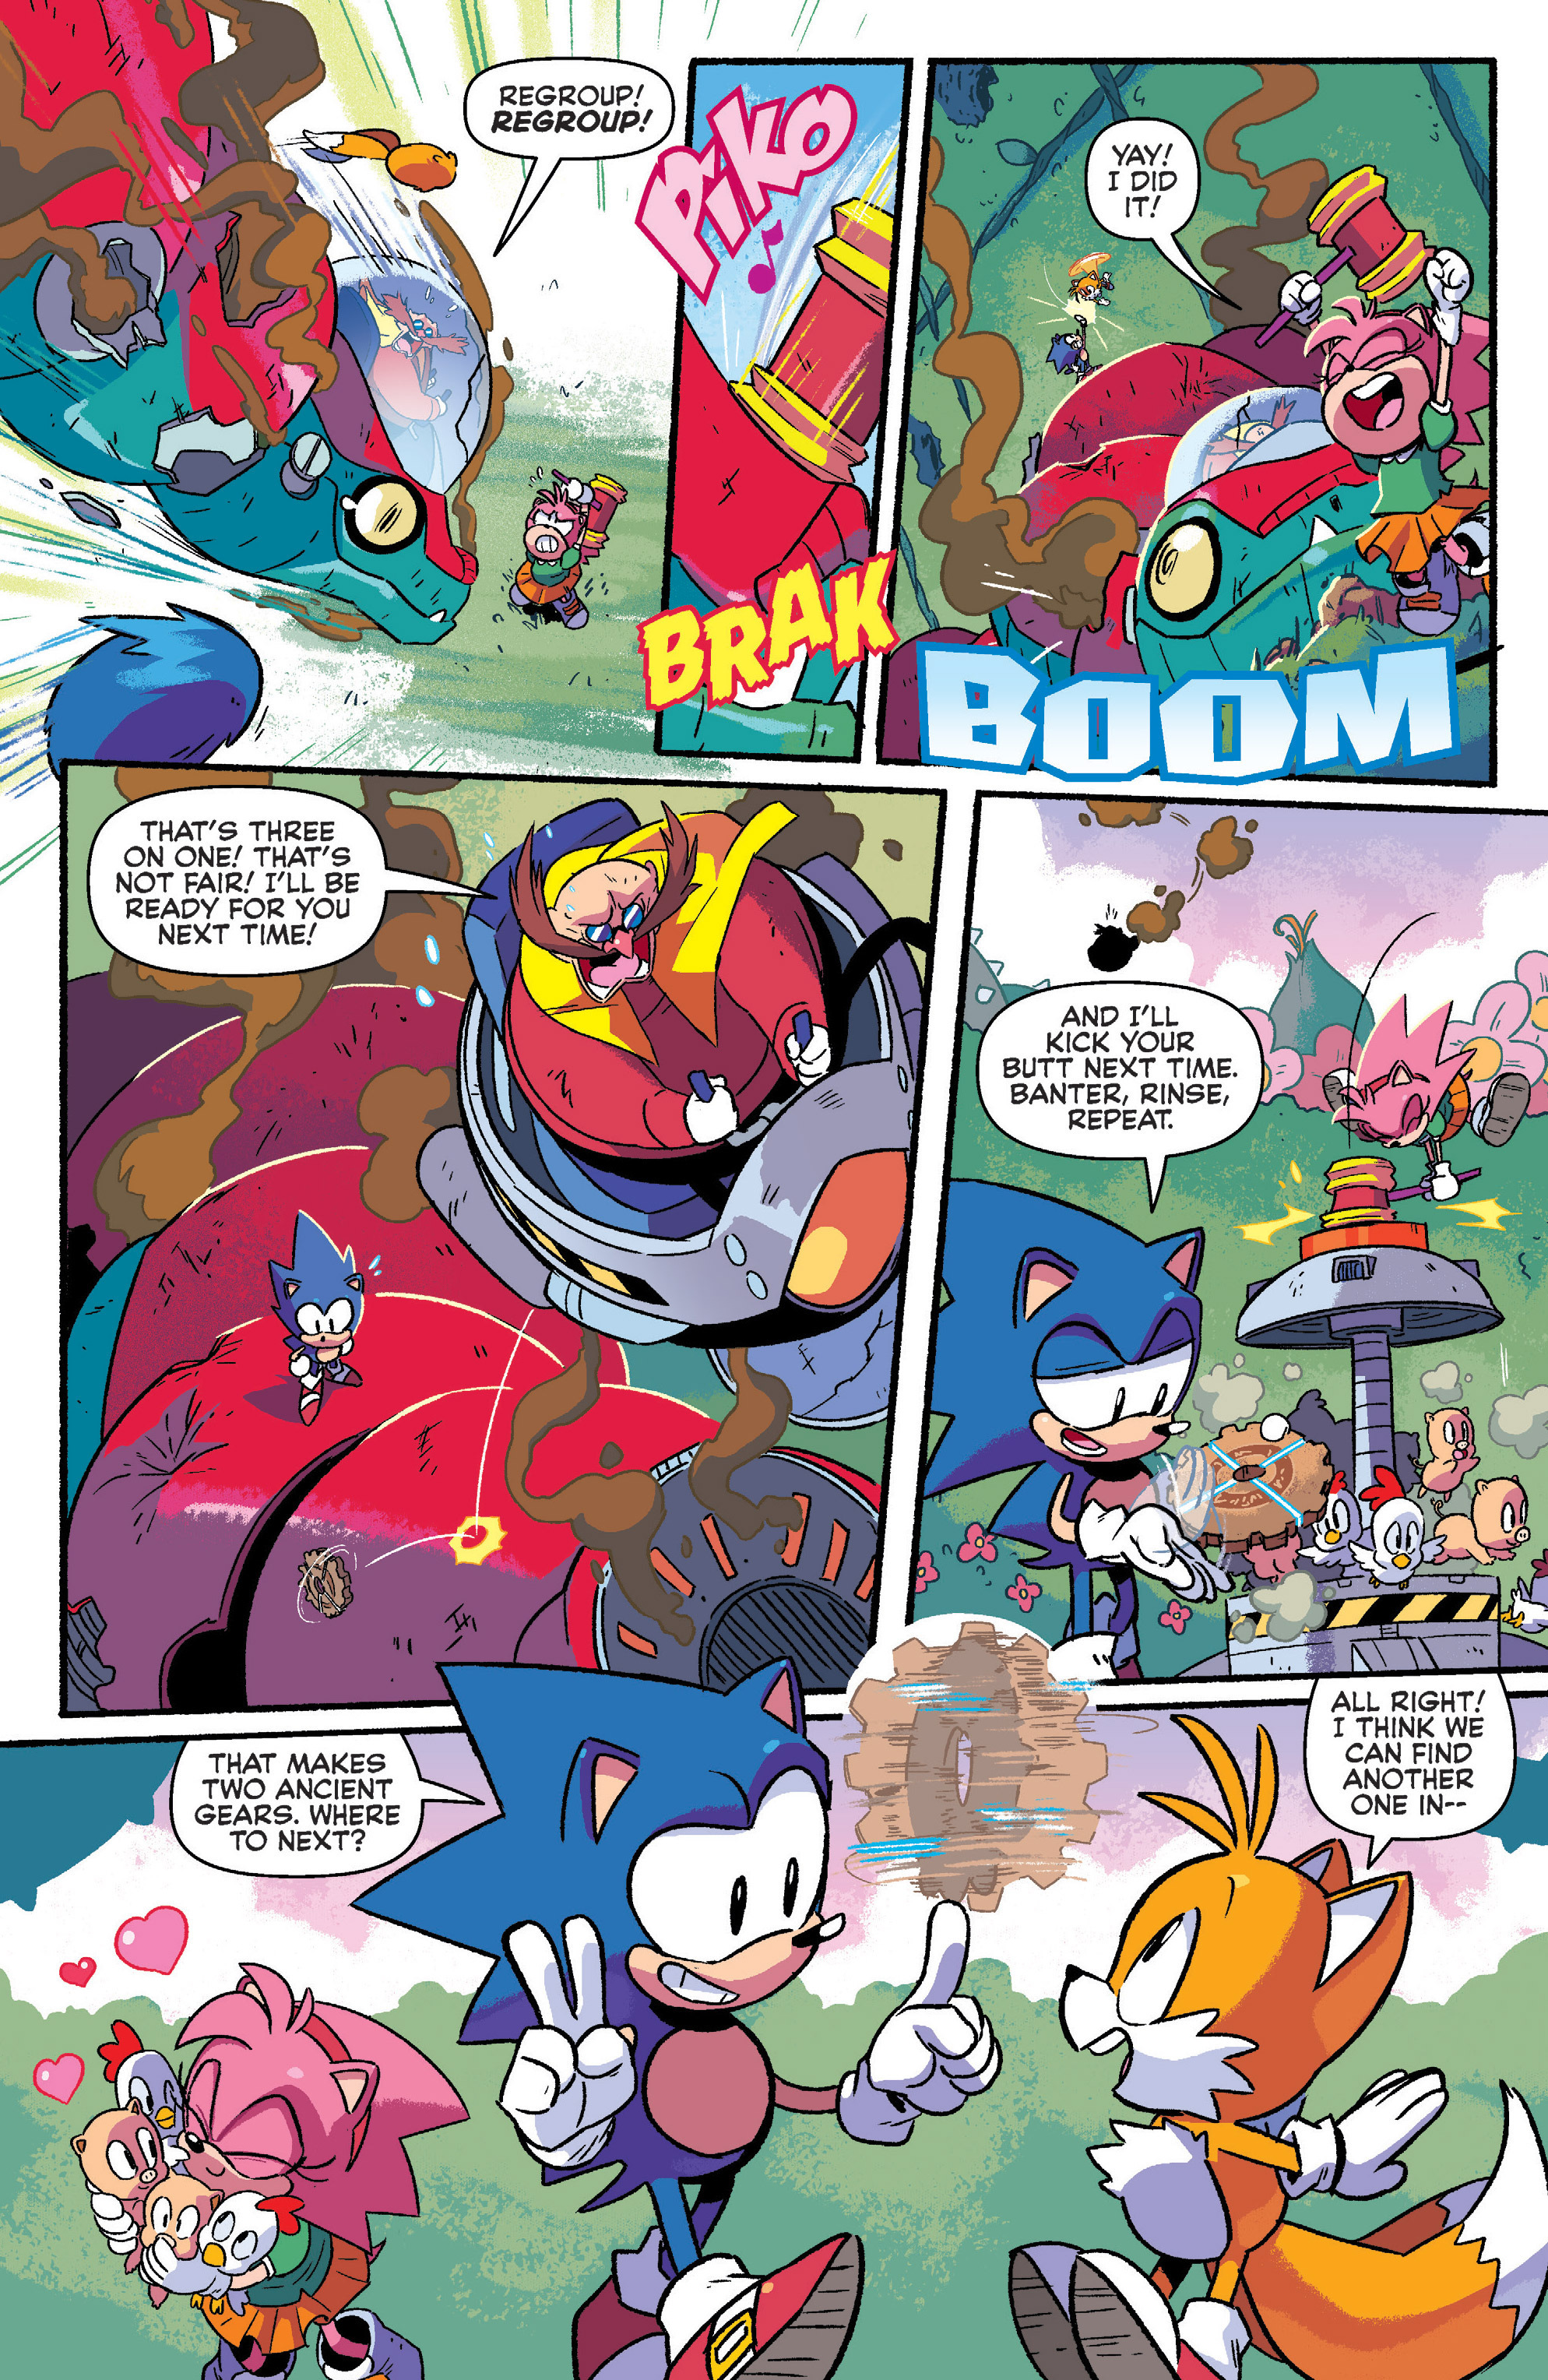 Sonic Mega Drive (2016) Chapter 1 - Page 1